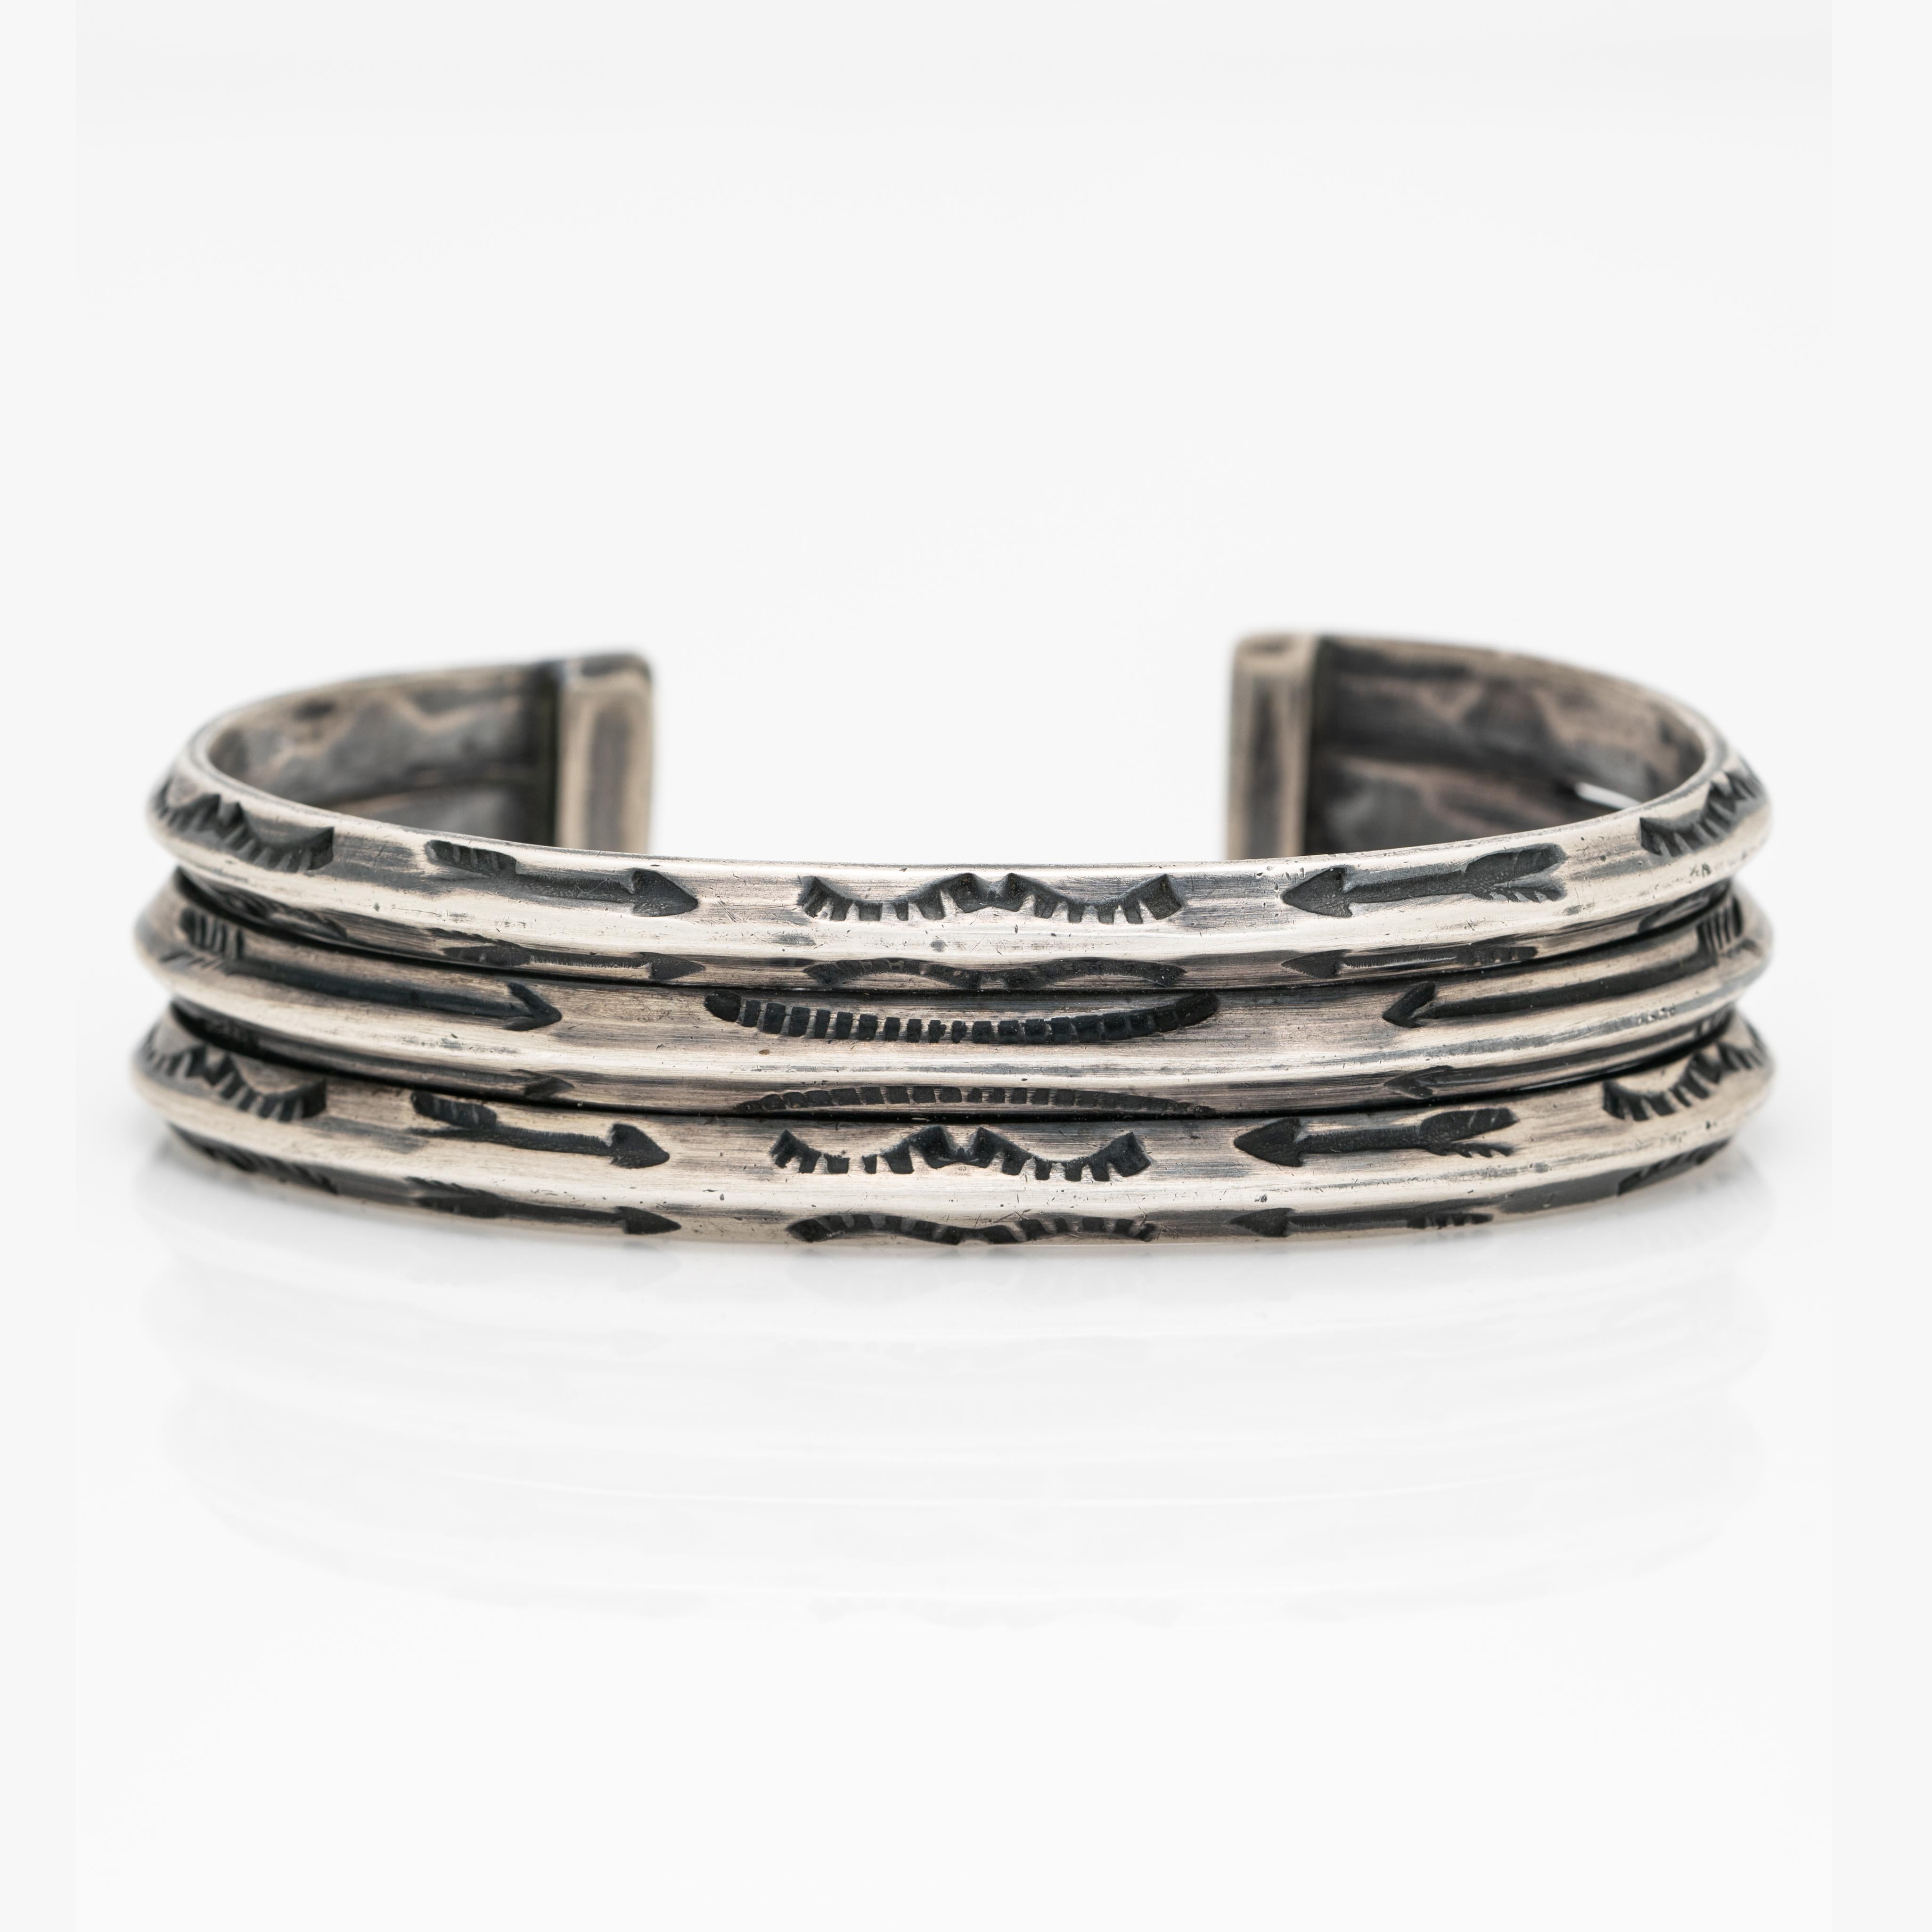 Vintage Navajo Silver Double Row Cuff with Hand Engraved Arrow Detail c.1950s 

Length: 67.7mm
Width: 16.29mm
Weight: 48.54 grams